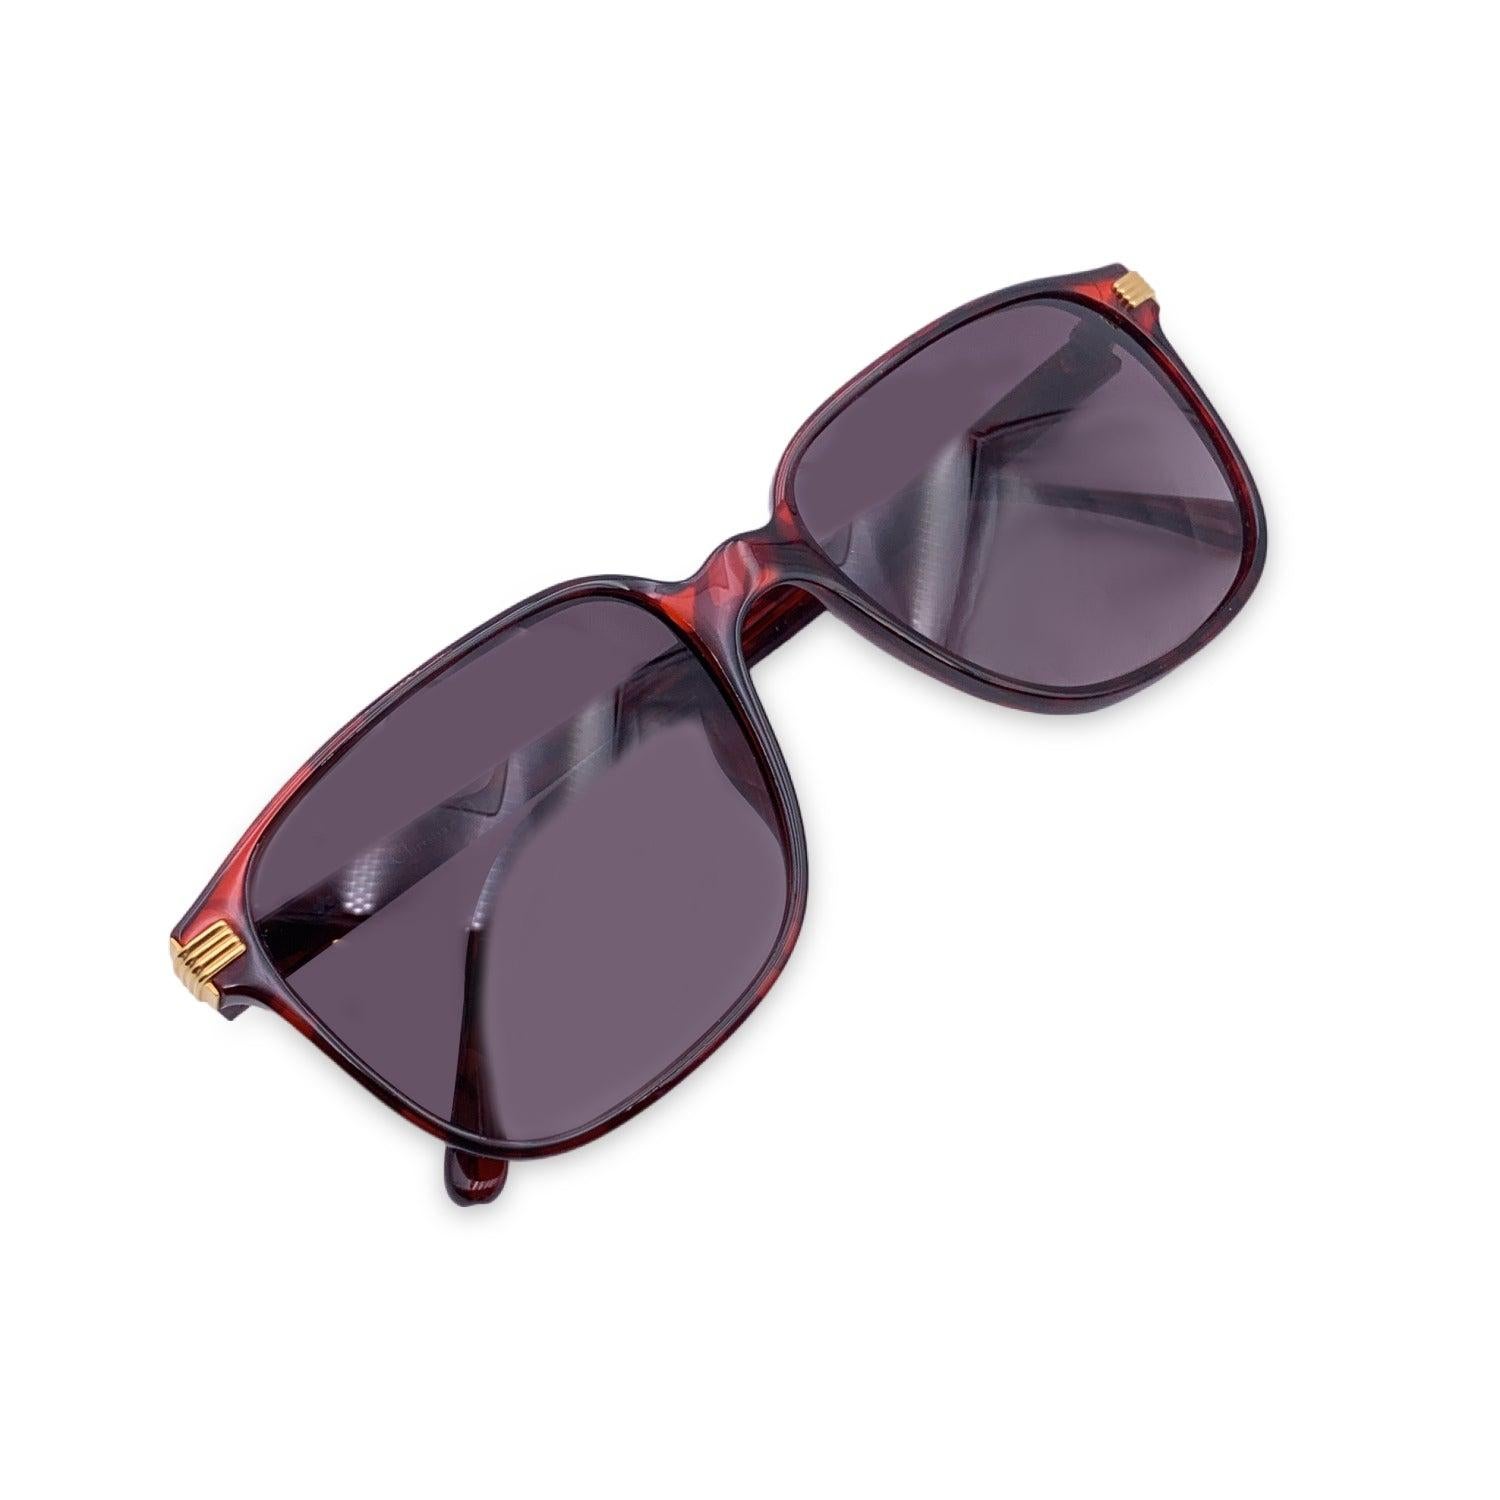 Vintage Christian Dior Women Sunglasses, Mod. 2542 30 Optyl. Size: 54/17 135mm. Red acetate frame, with gold details on frame sides. CD logo con temples . 100% Total UVA/UVB protection. Grey gradient lenses. Condition A+ - MINT Never Worn, no defect